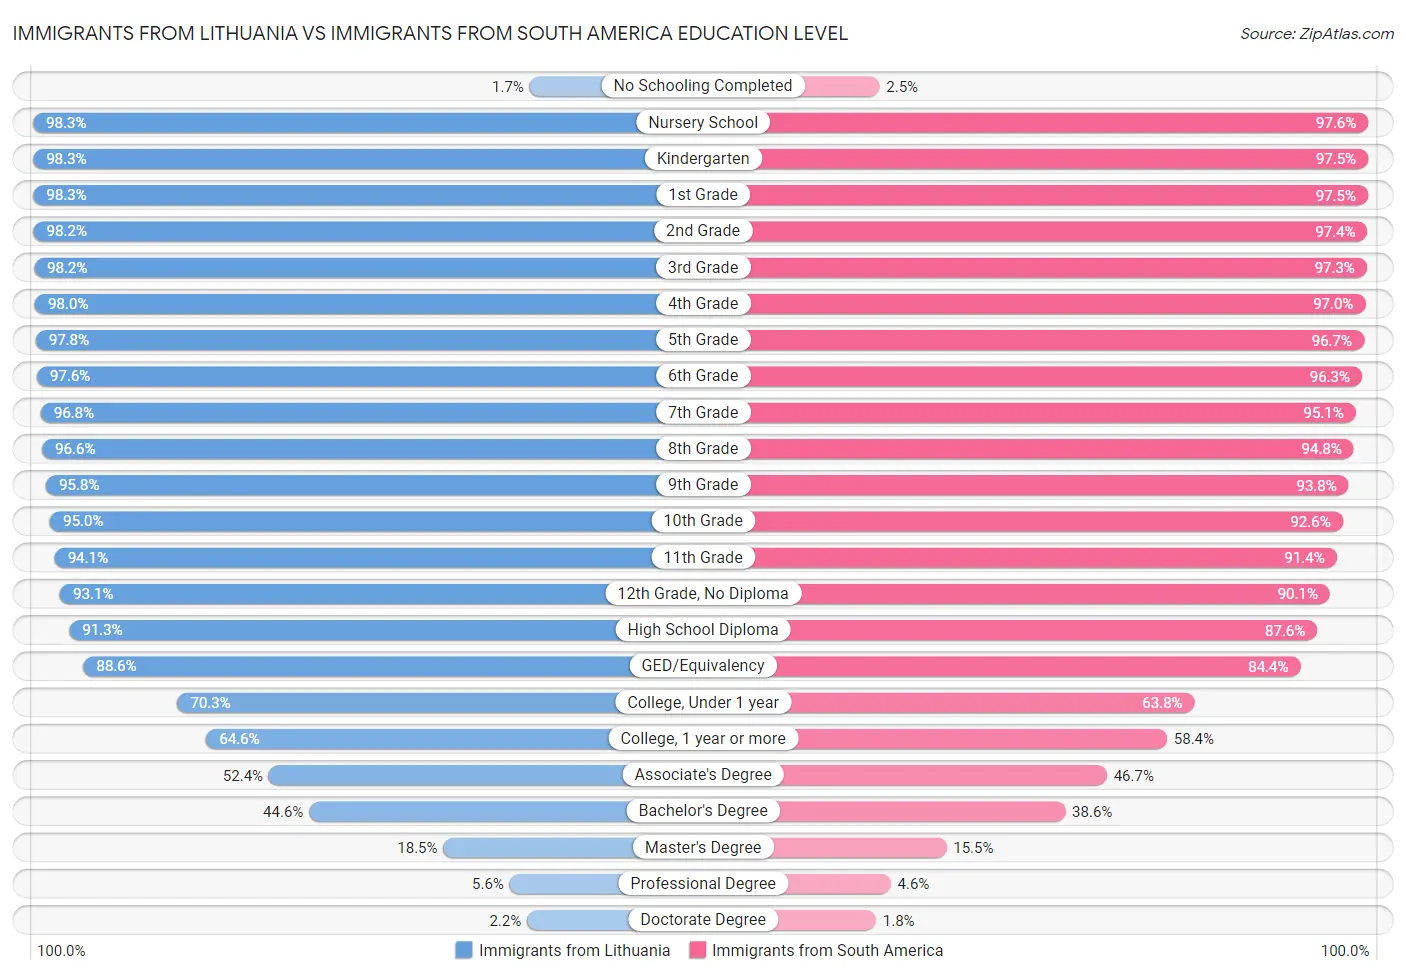 Immigrants from Lithuania vs Immigrants from South America Education Level